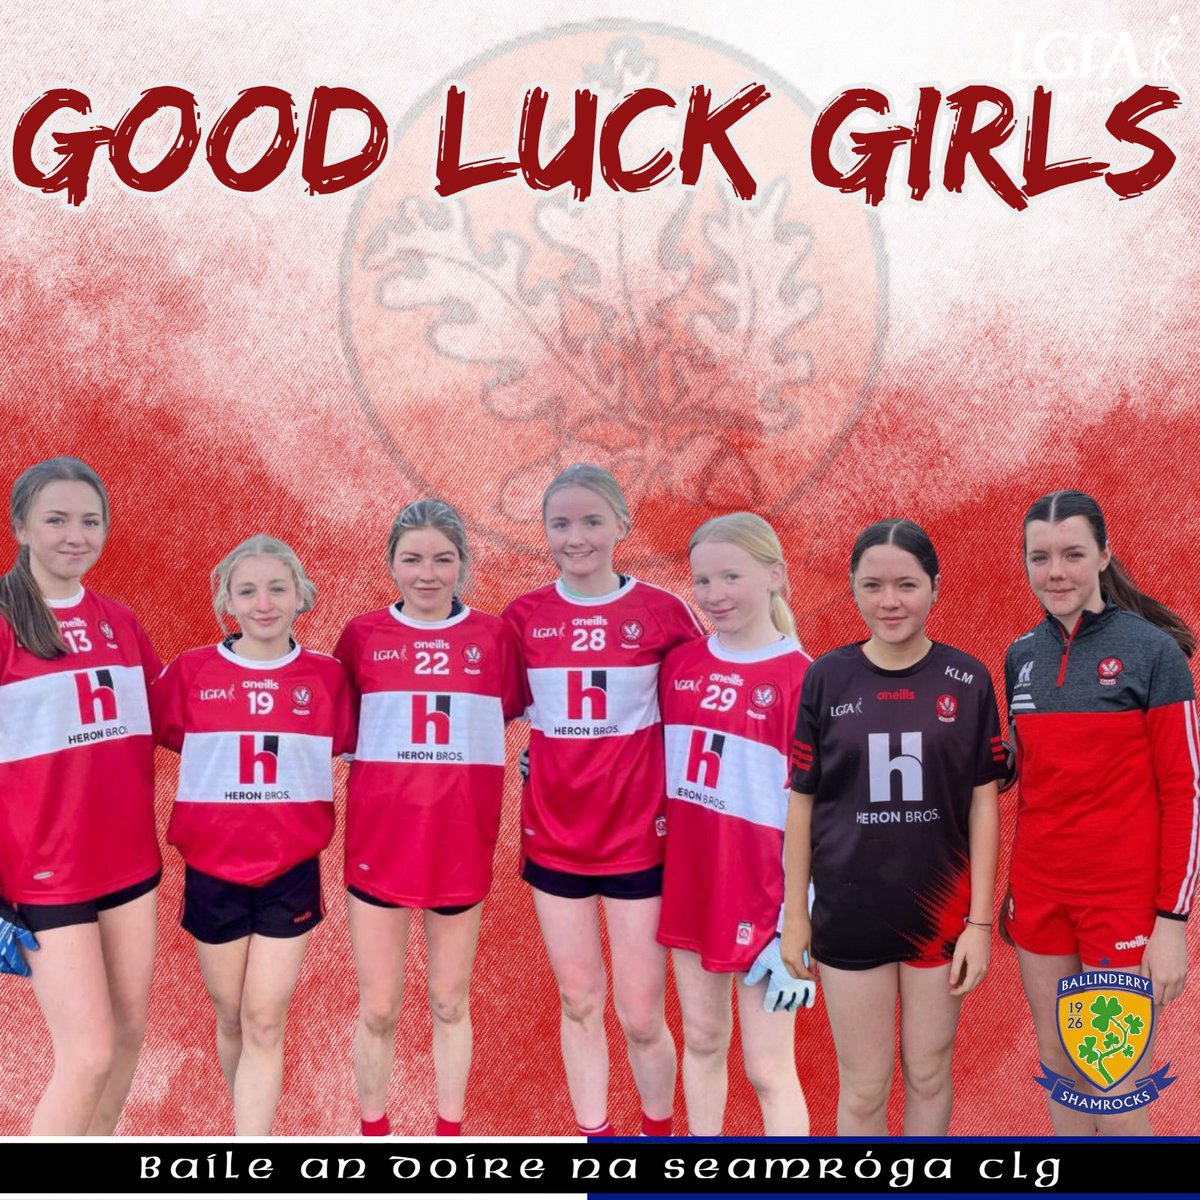 Tomorrow, we send our best wishes to Ailise, Emma, Abaigh, Eva, and Grainne, and Oonagh as they compete in the All Ireland Gold Series group stages in Louth. On Sunday, we're rooting for Kerri Lee, Rionach, and their teammates in the U16 Ulster Final. #PROUD ☘️